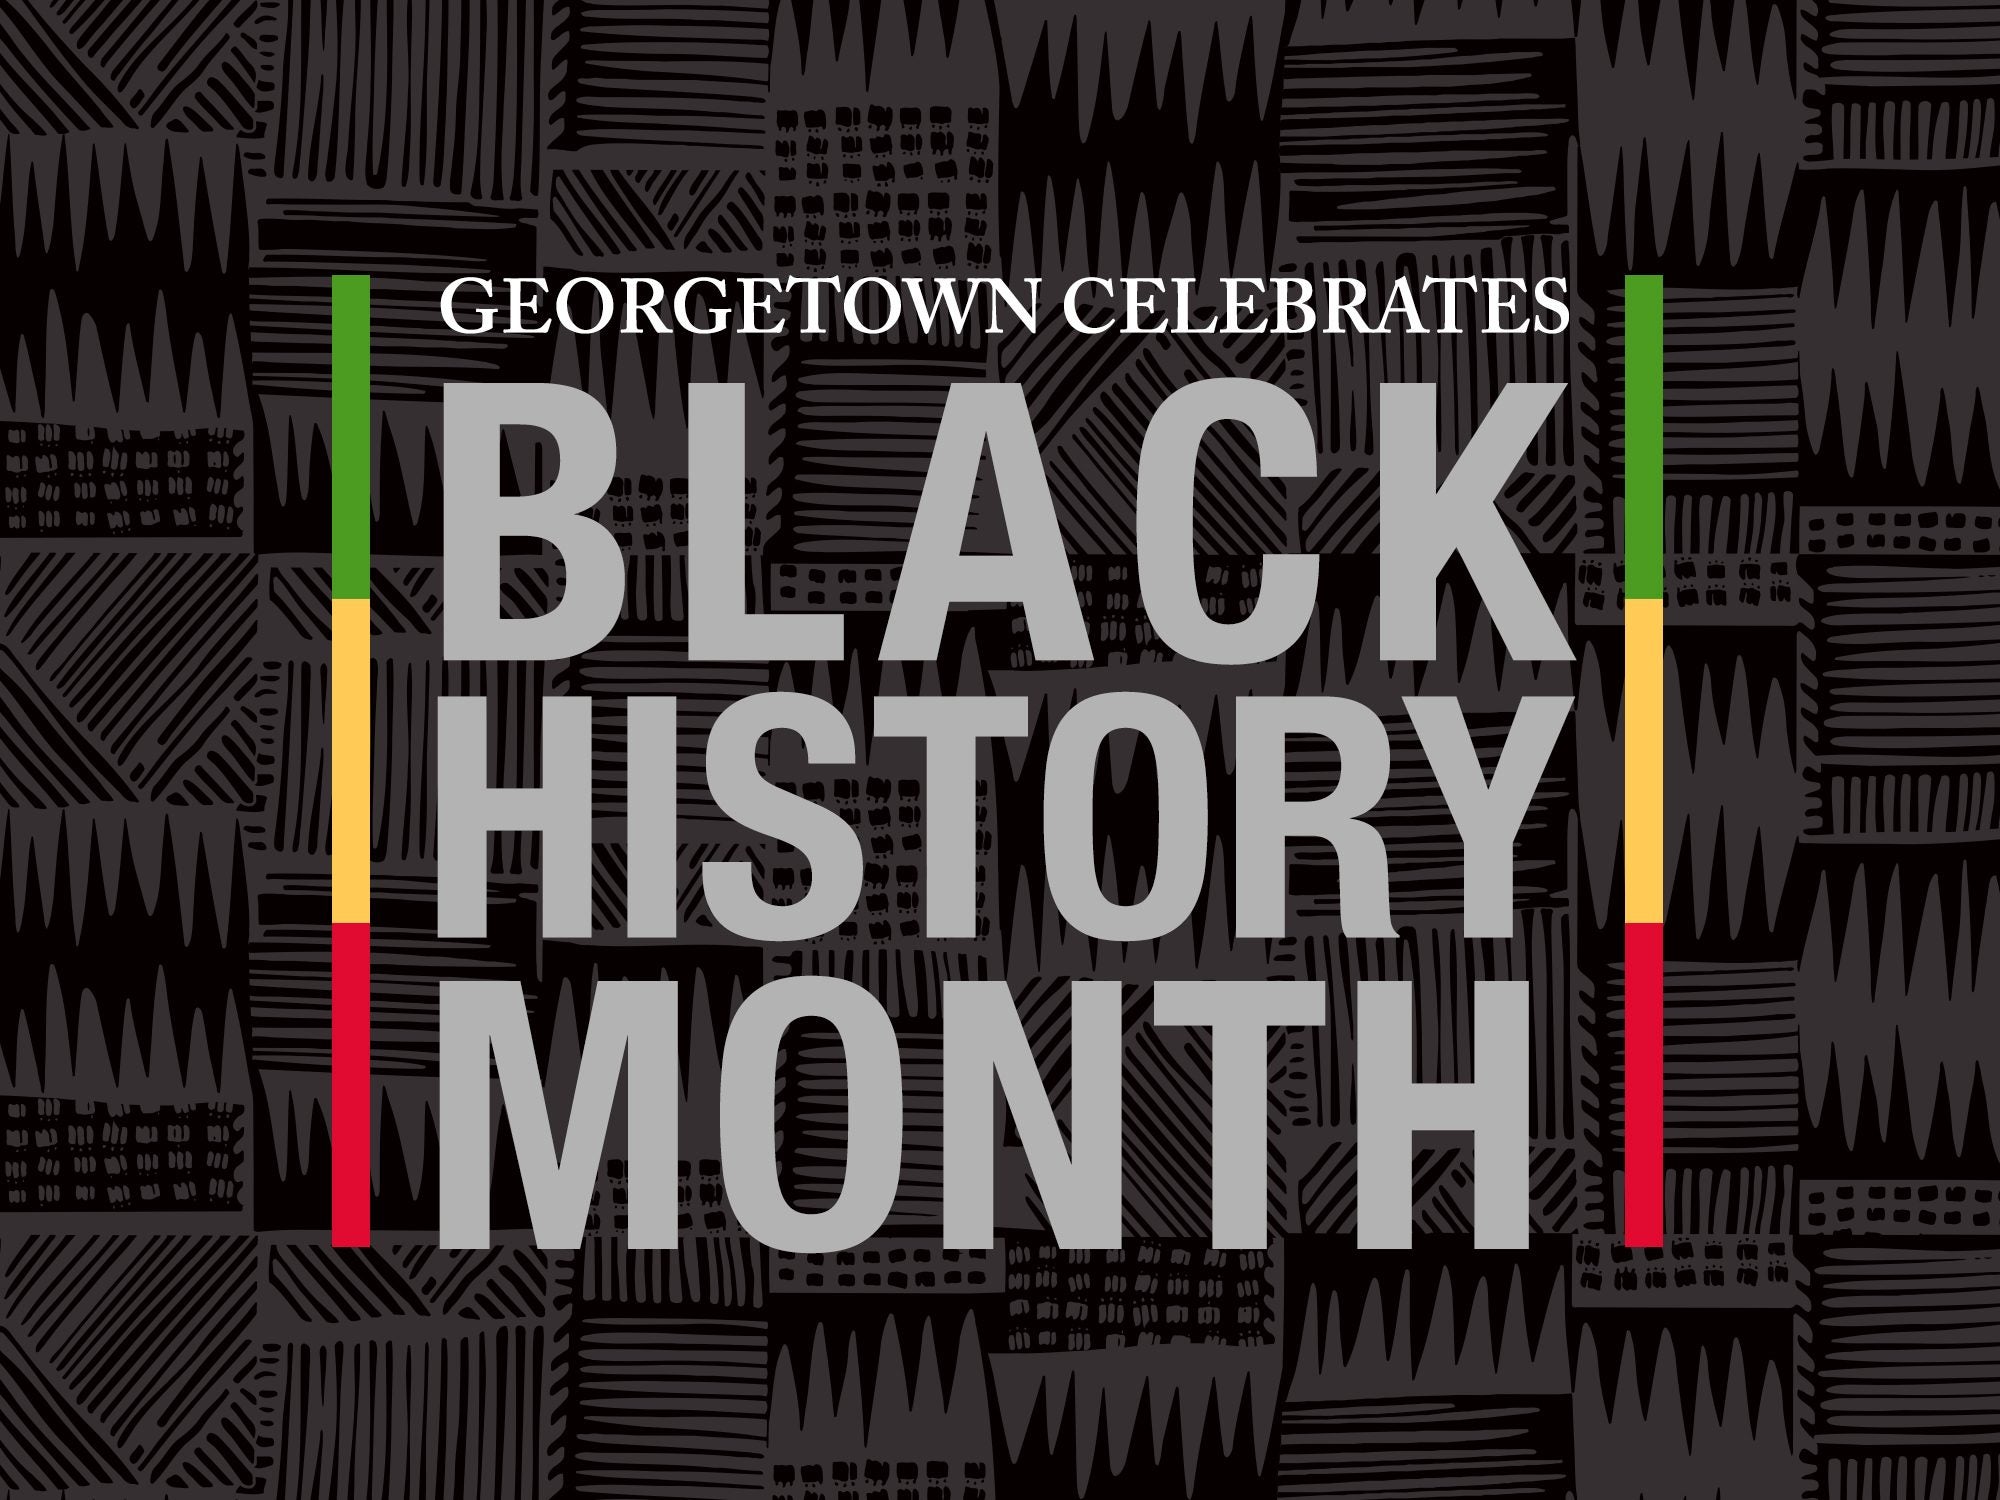 The history behind Black History Month